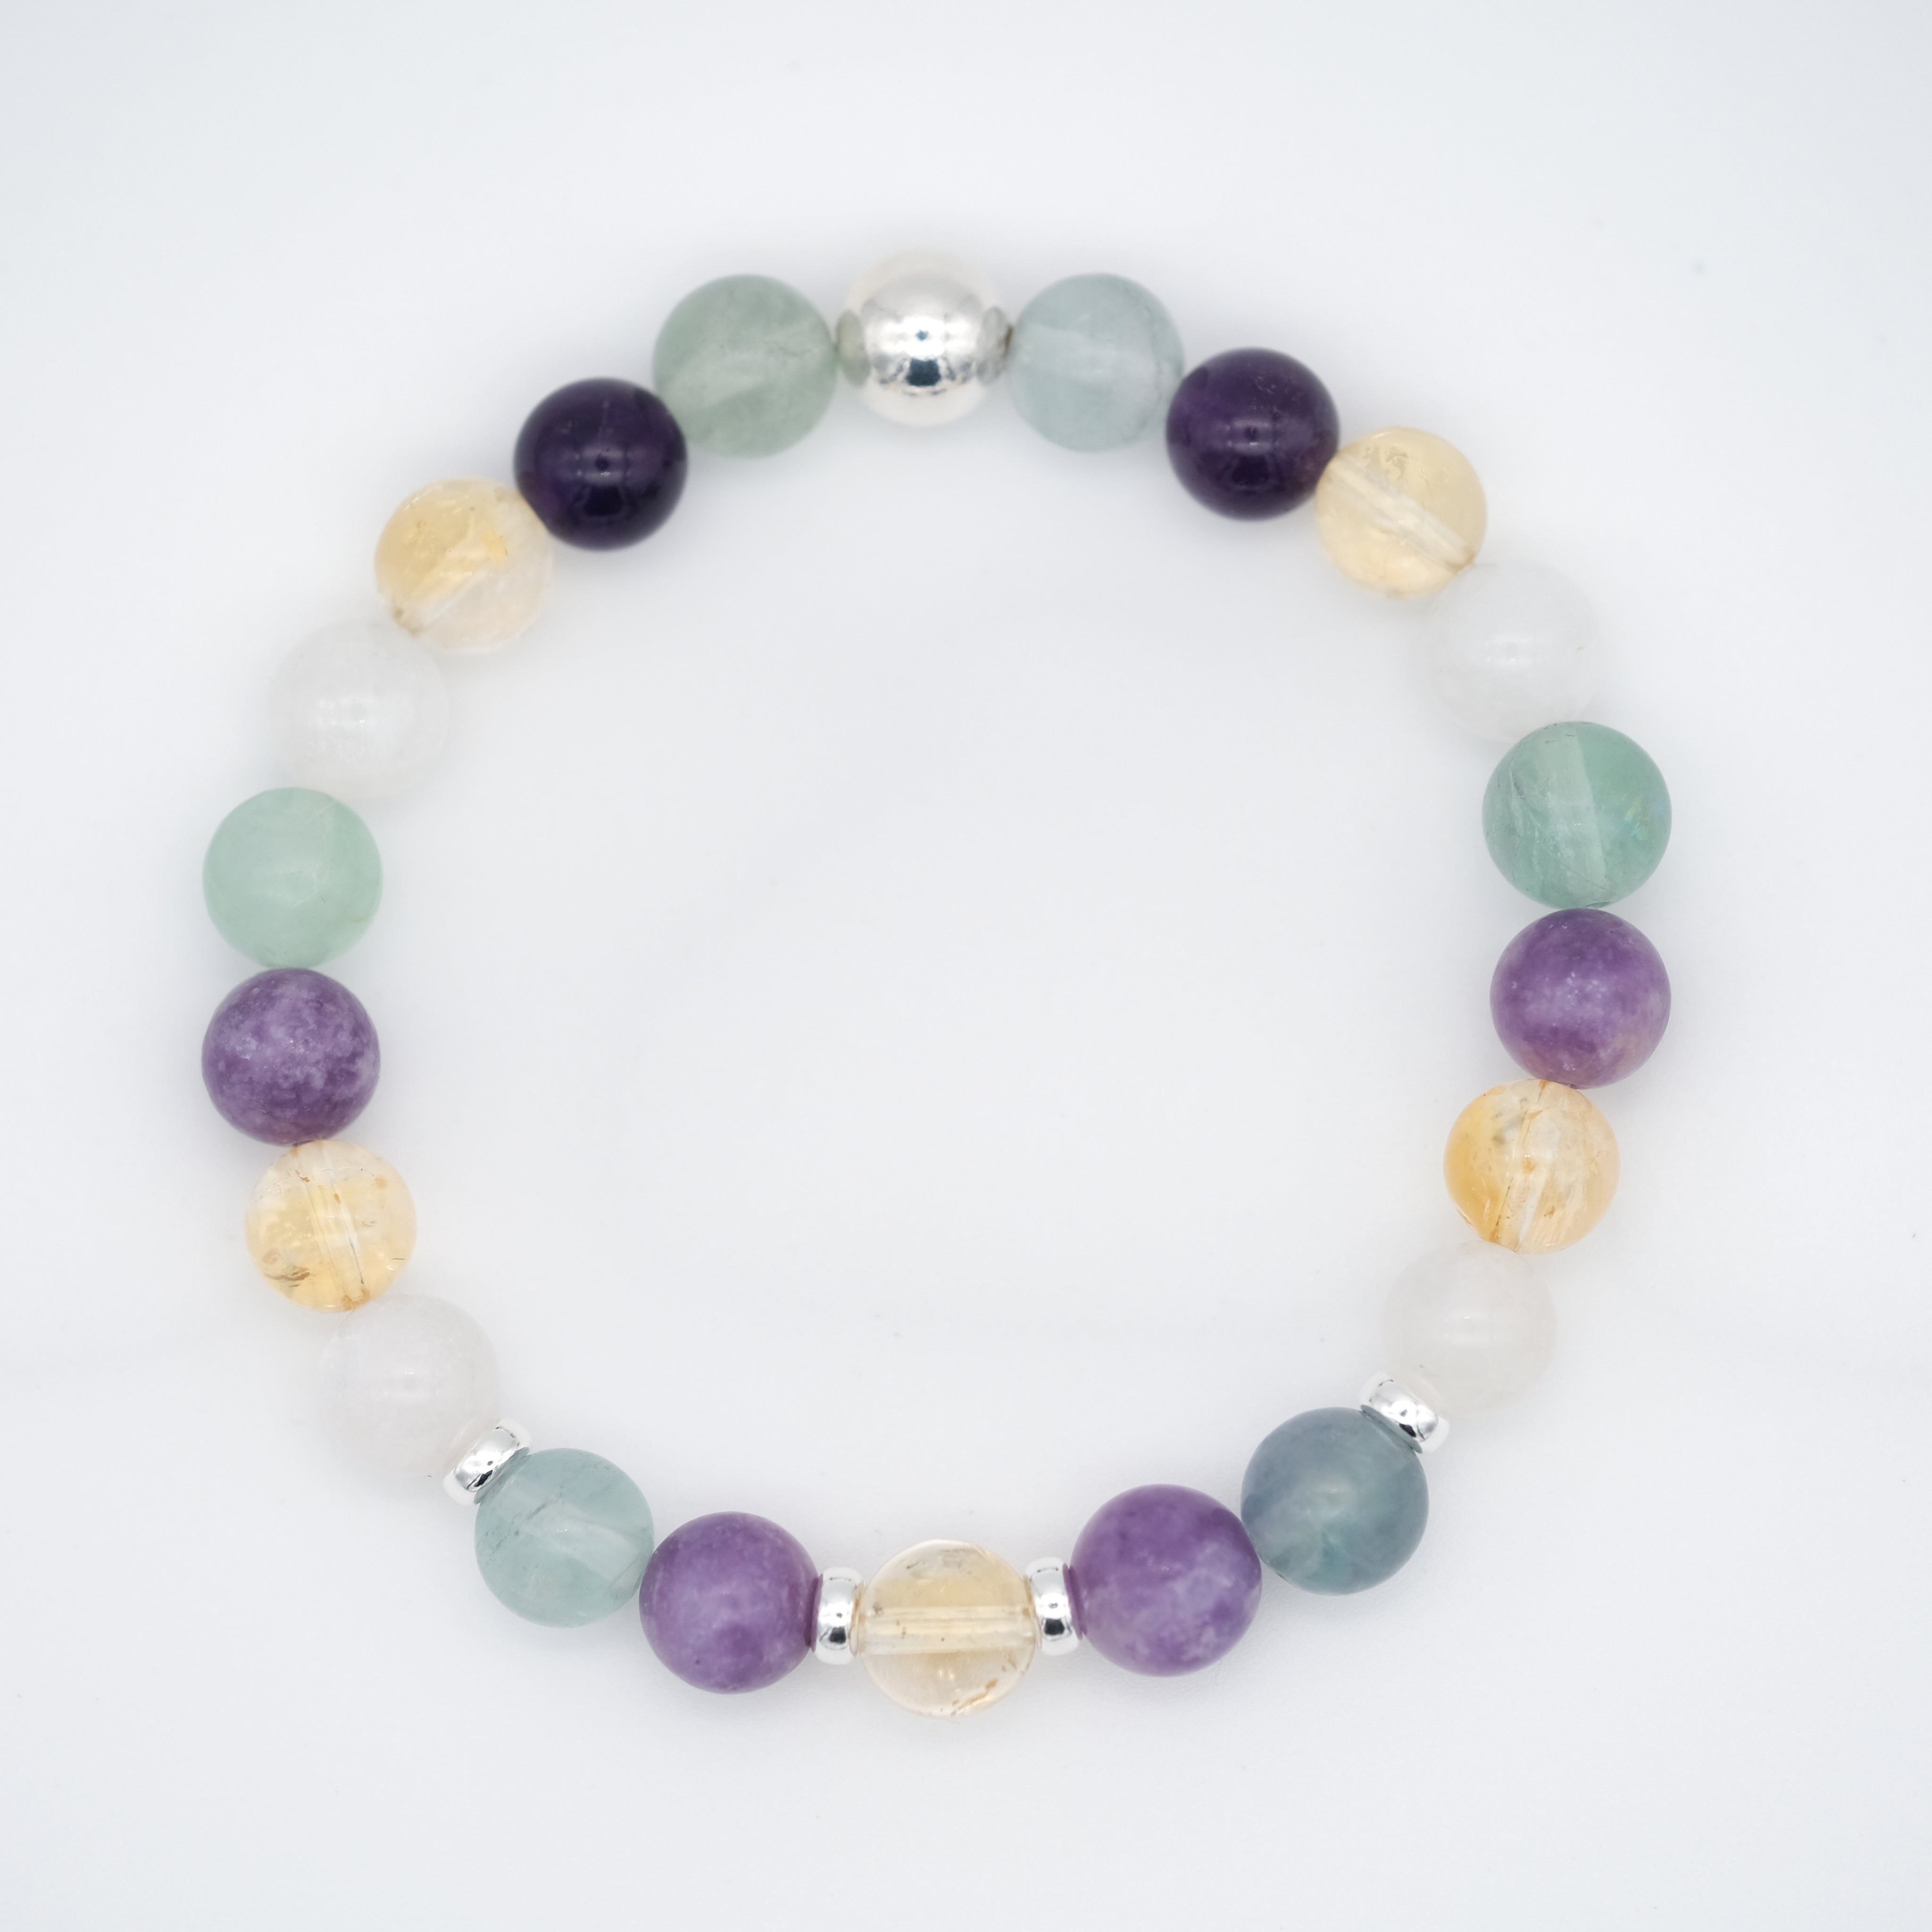 Samayla menopause gemstone bracelet in 8mm beads with silver accessories from above